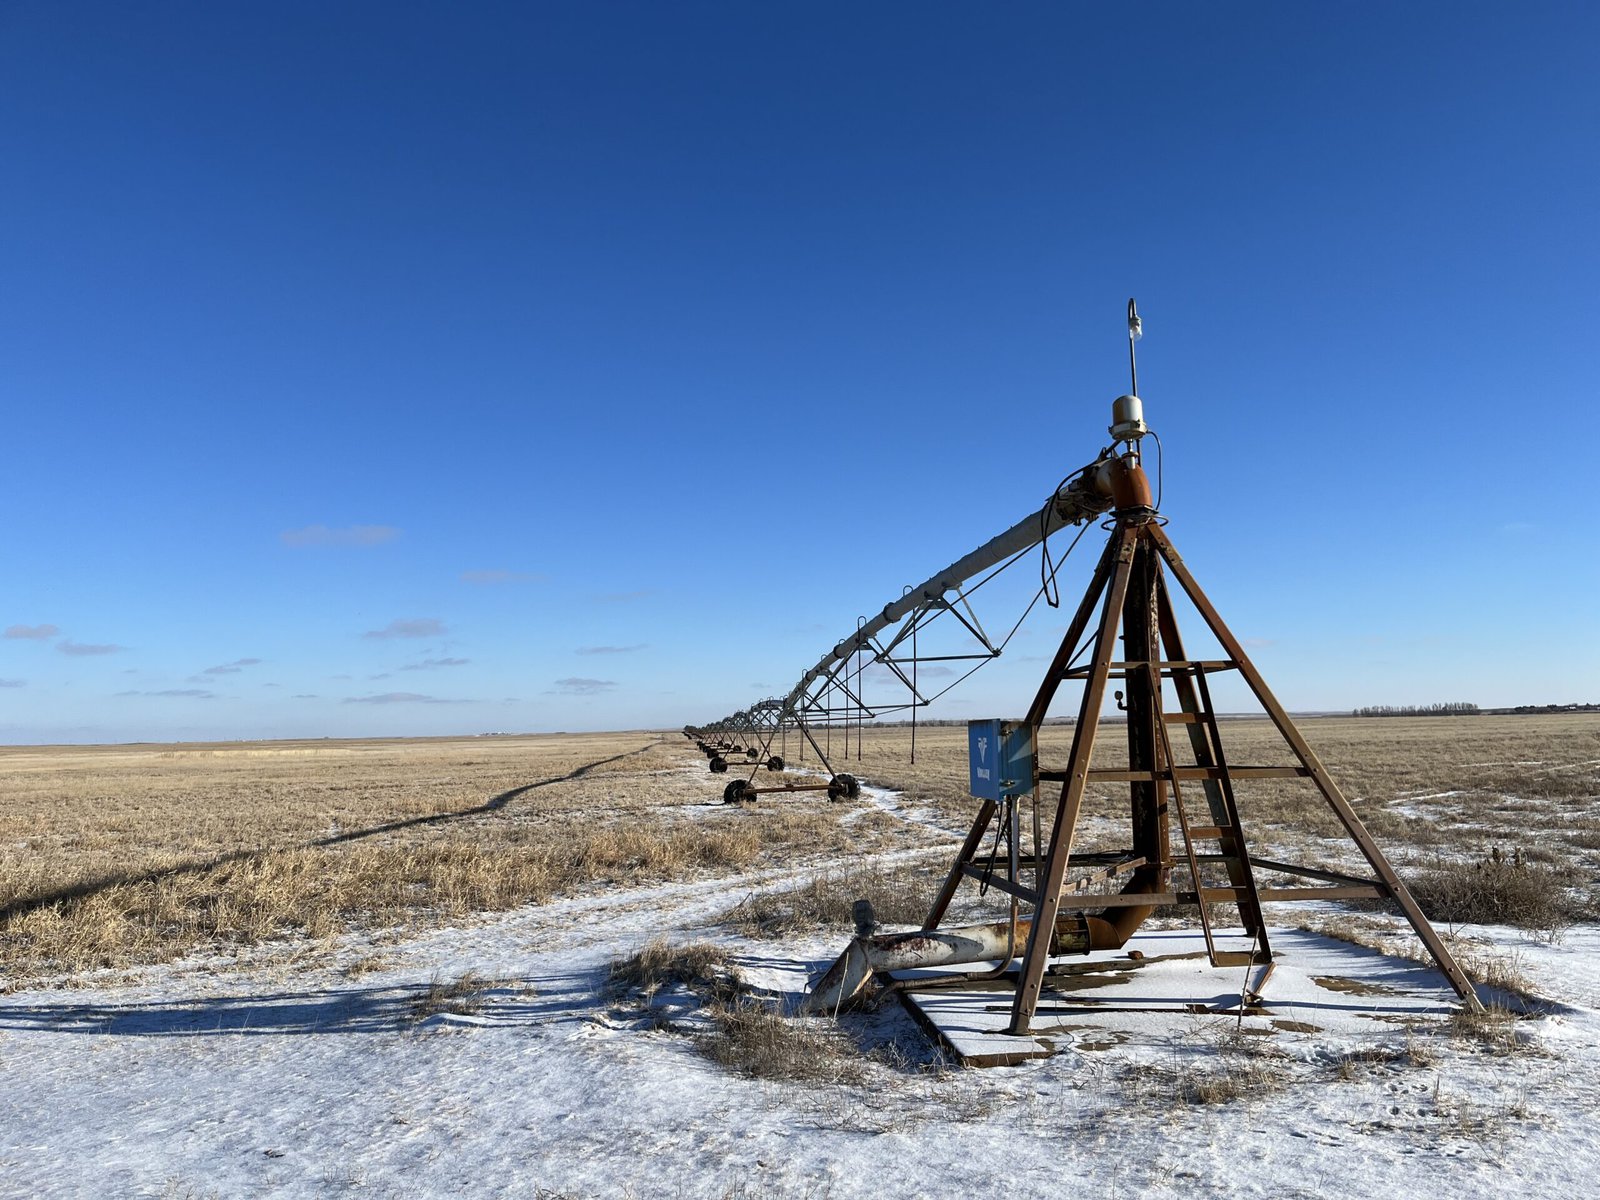 Rodney Smith's pivot is the largest connected to the aquifer. The structure in the foreground remains stationary, while the rest on wheels moves around — pivots around — the fixed structure.